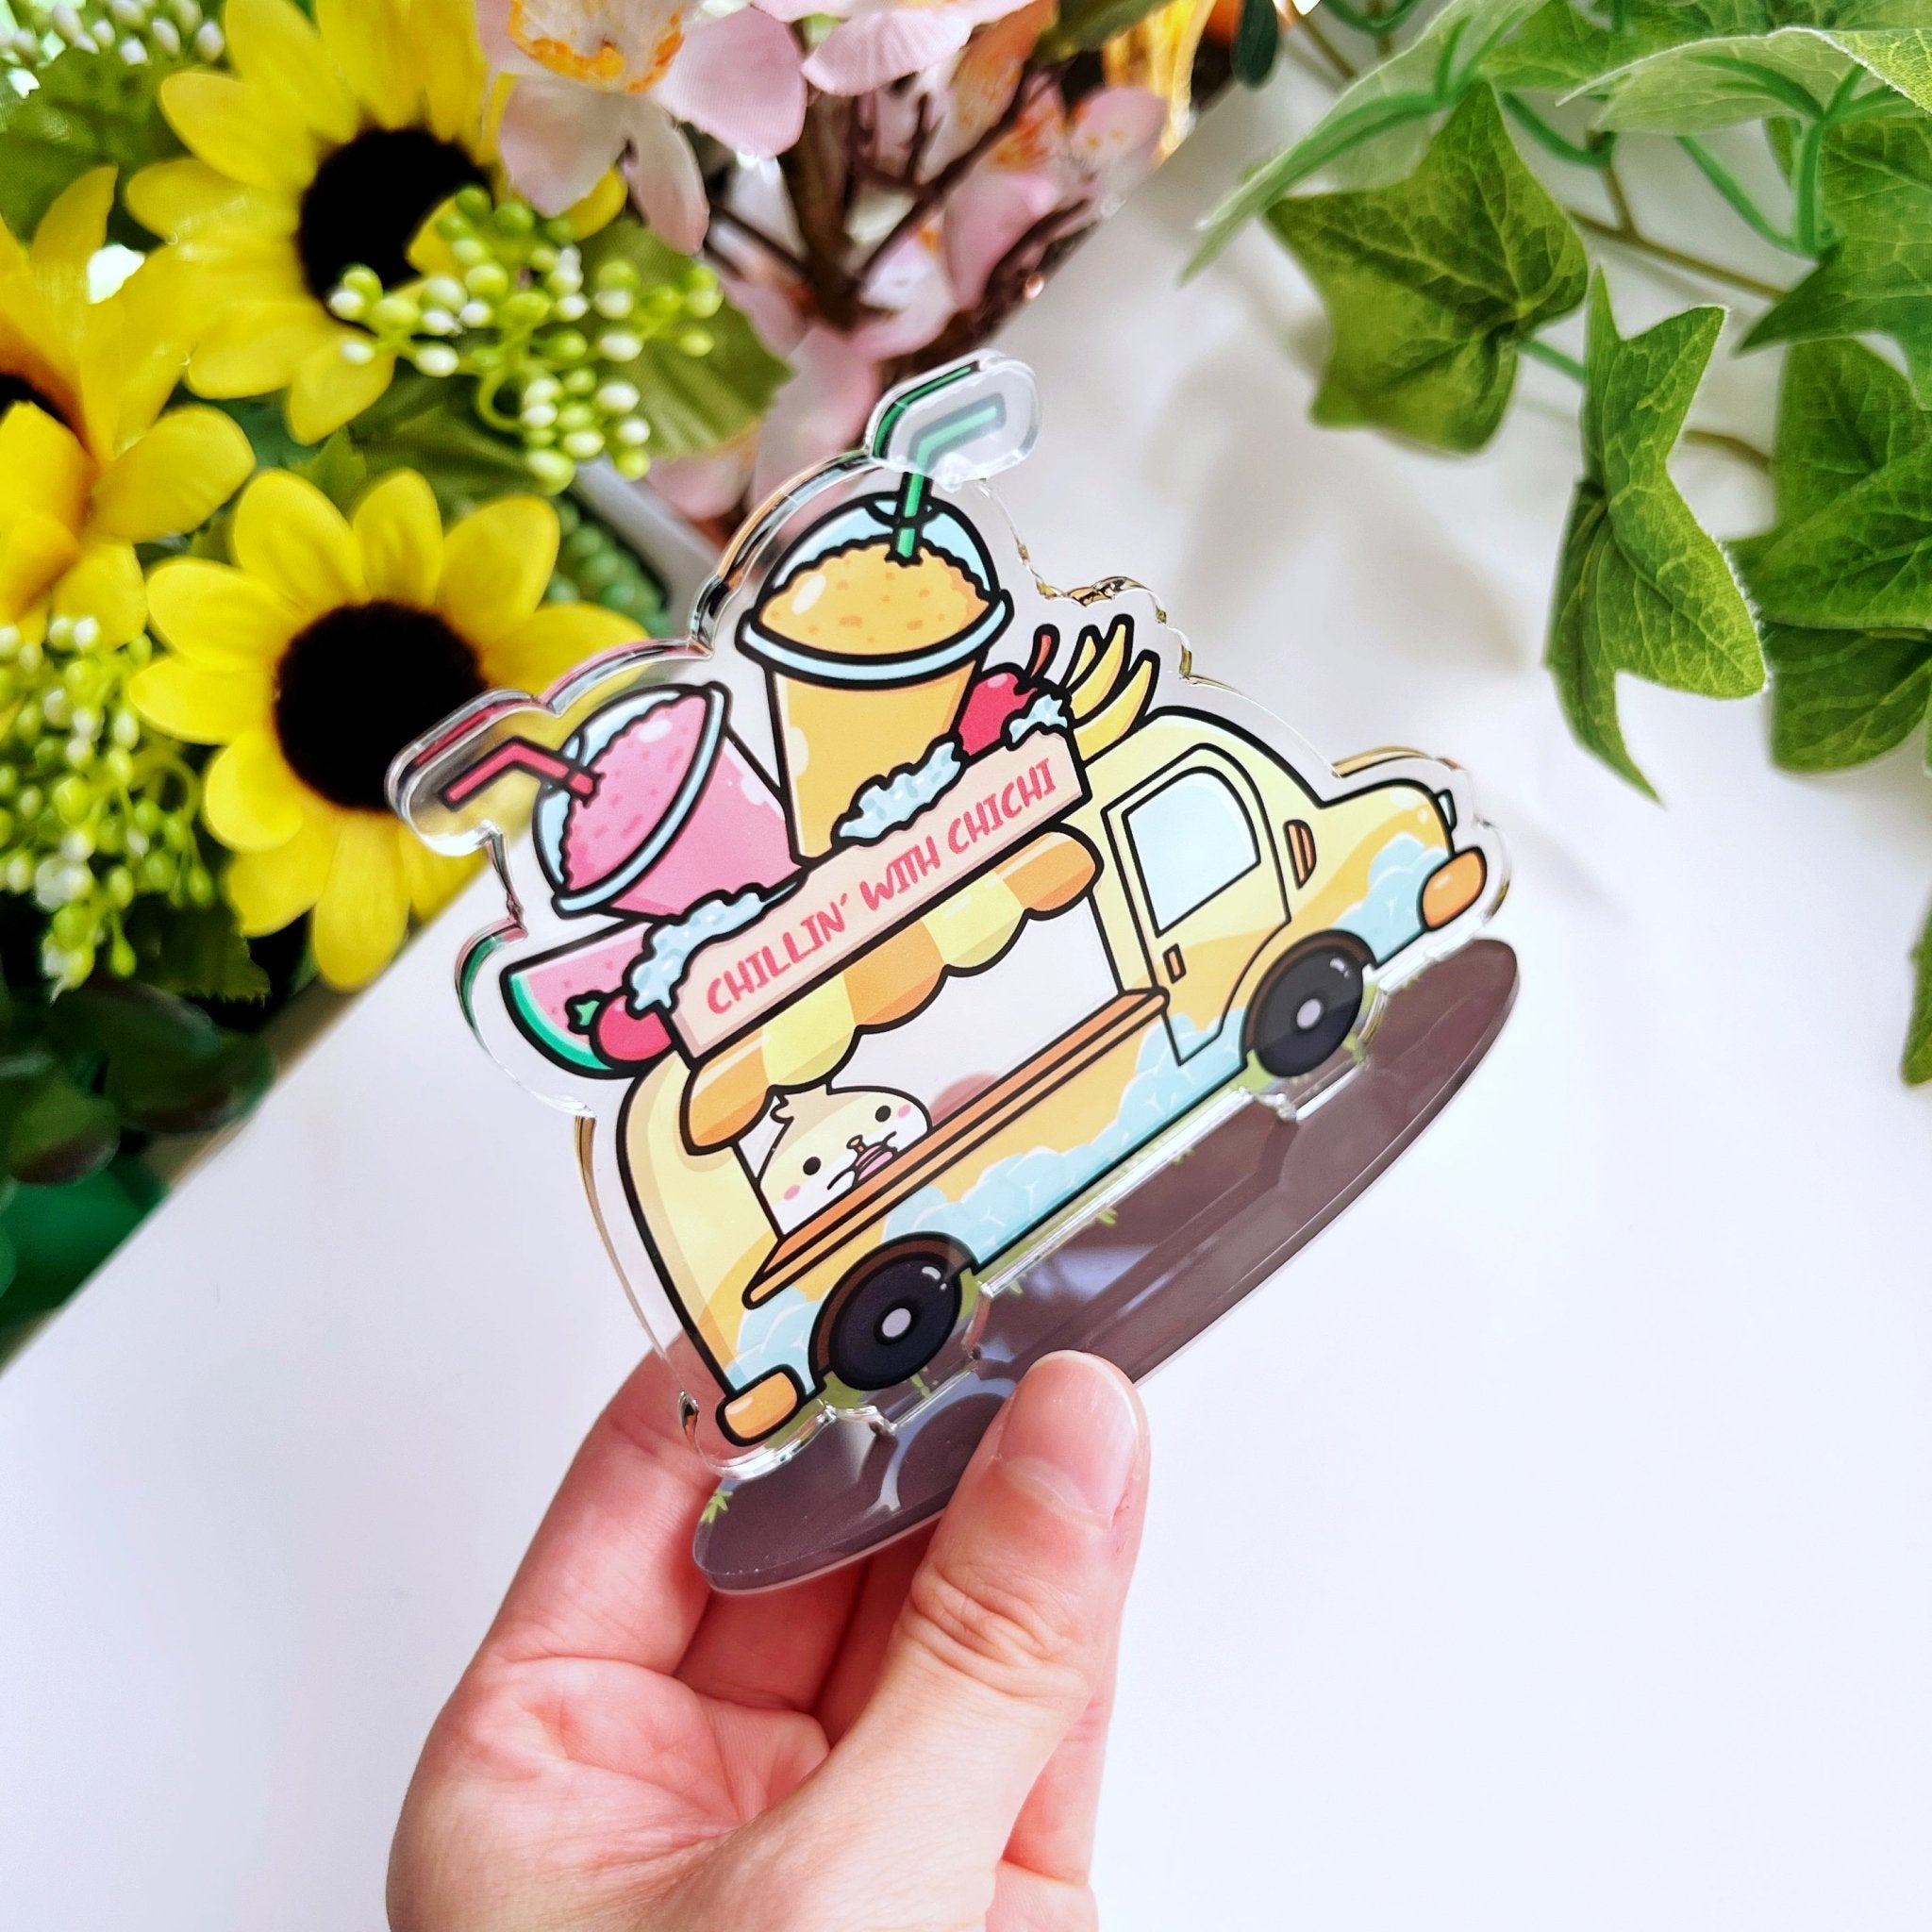 Acrylic Note Holder - Chichi&#39;s Smoothie Truck - SumLilThings